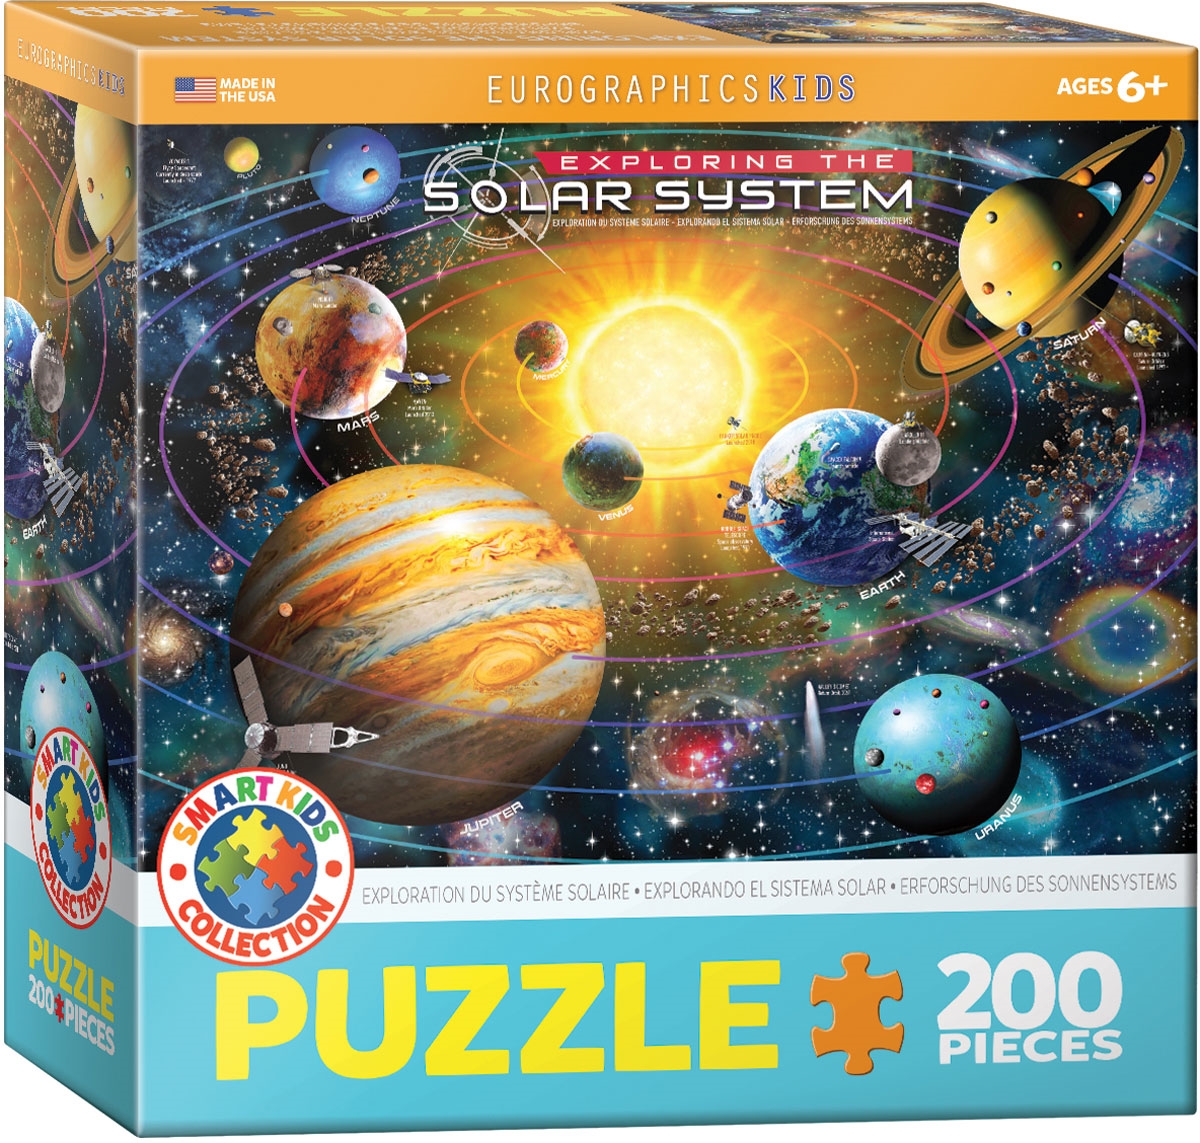 Eurographics: Smart Puzzle Accessory Kit - Fair Game